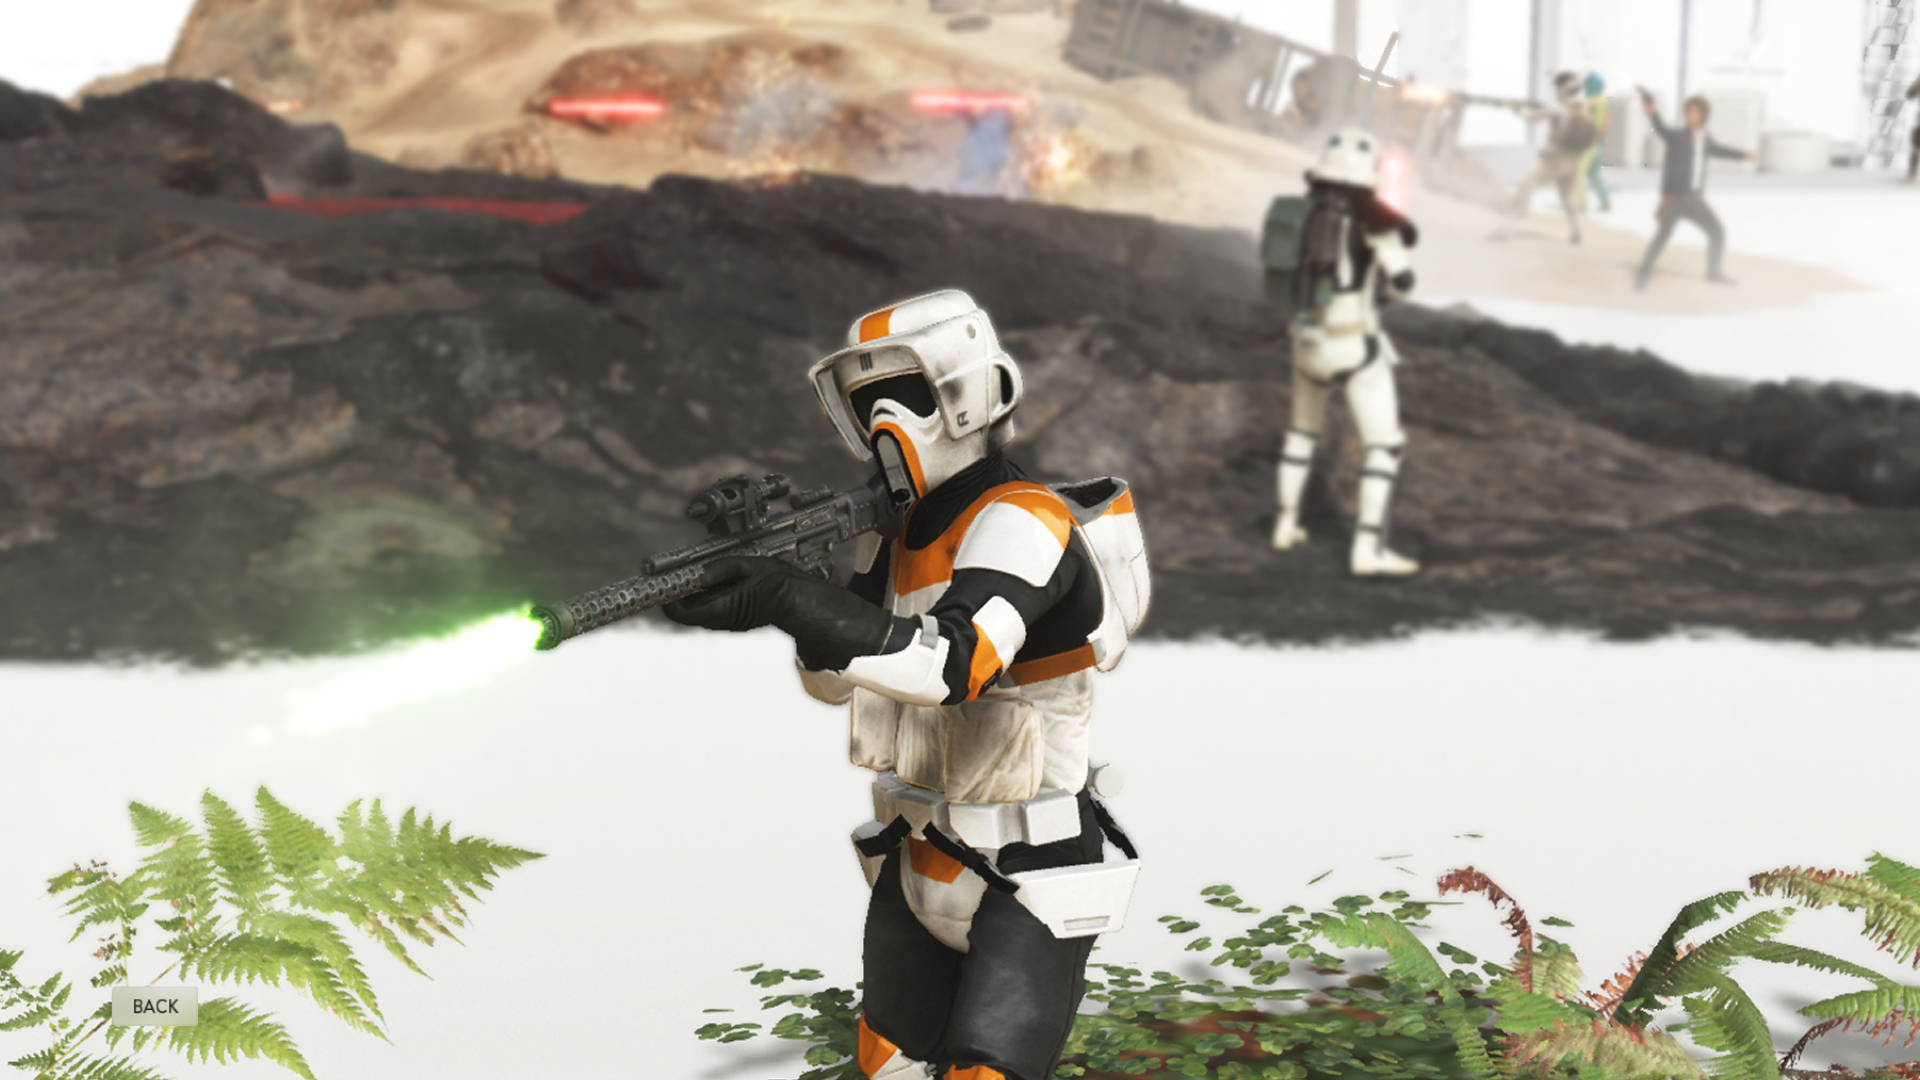 212th Attack Battalion Scout Trooper at Star Wars: Battlefront (2015) Nexus and Community